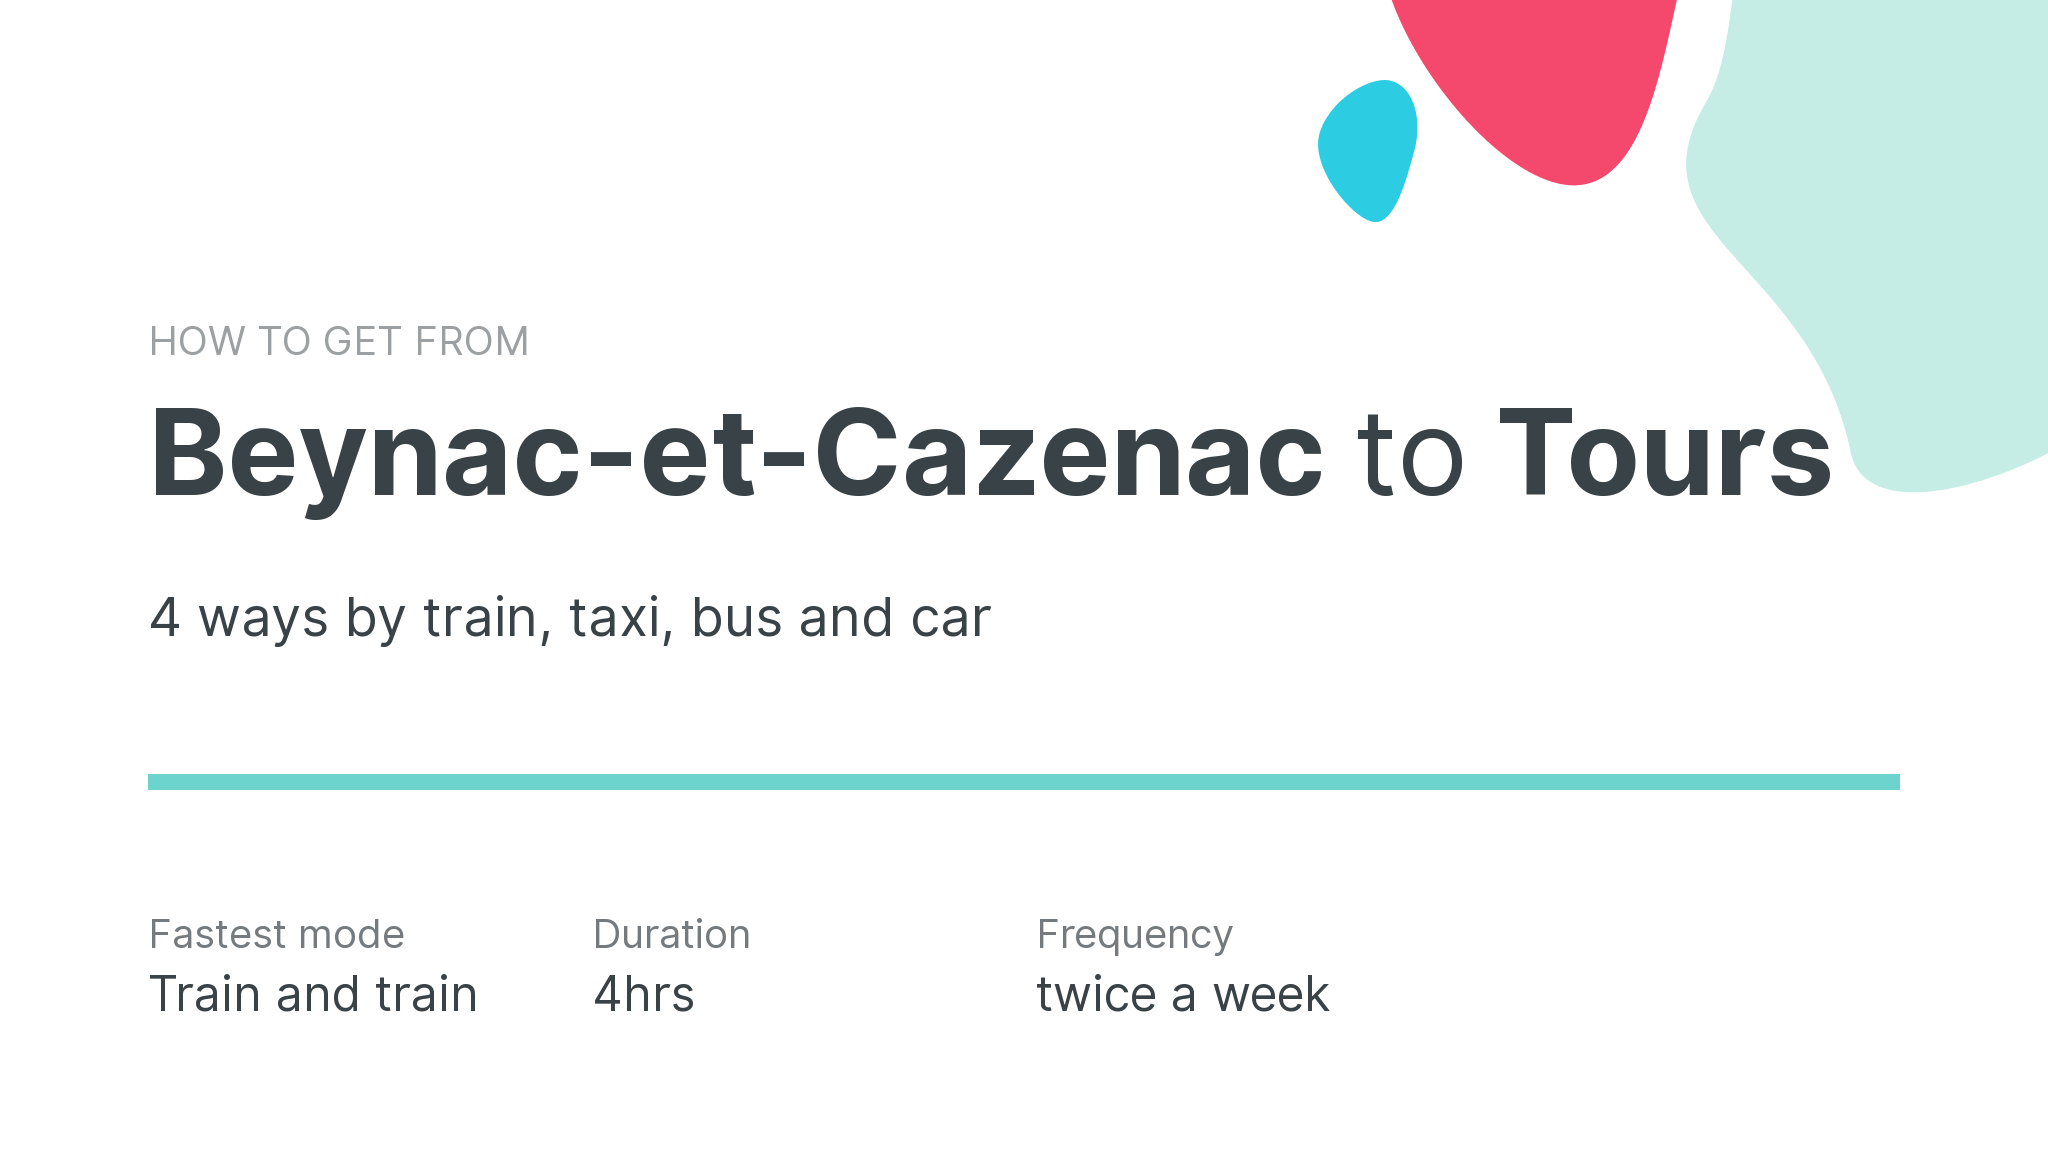 How do I get from Beynac-et-Cazenac to Tours